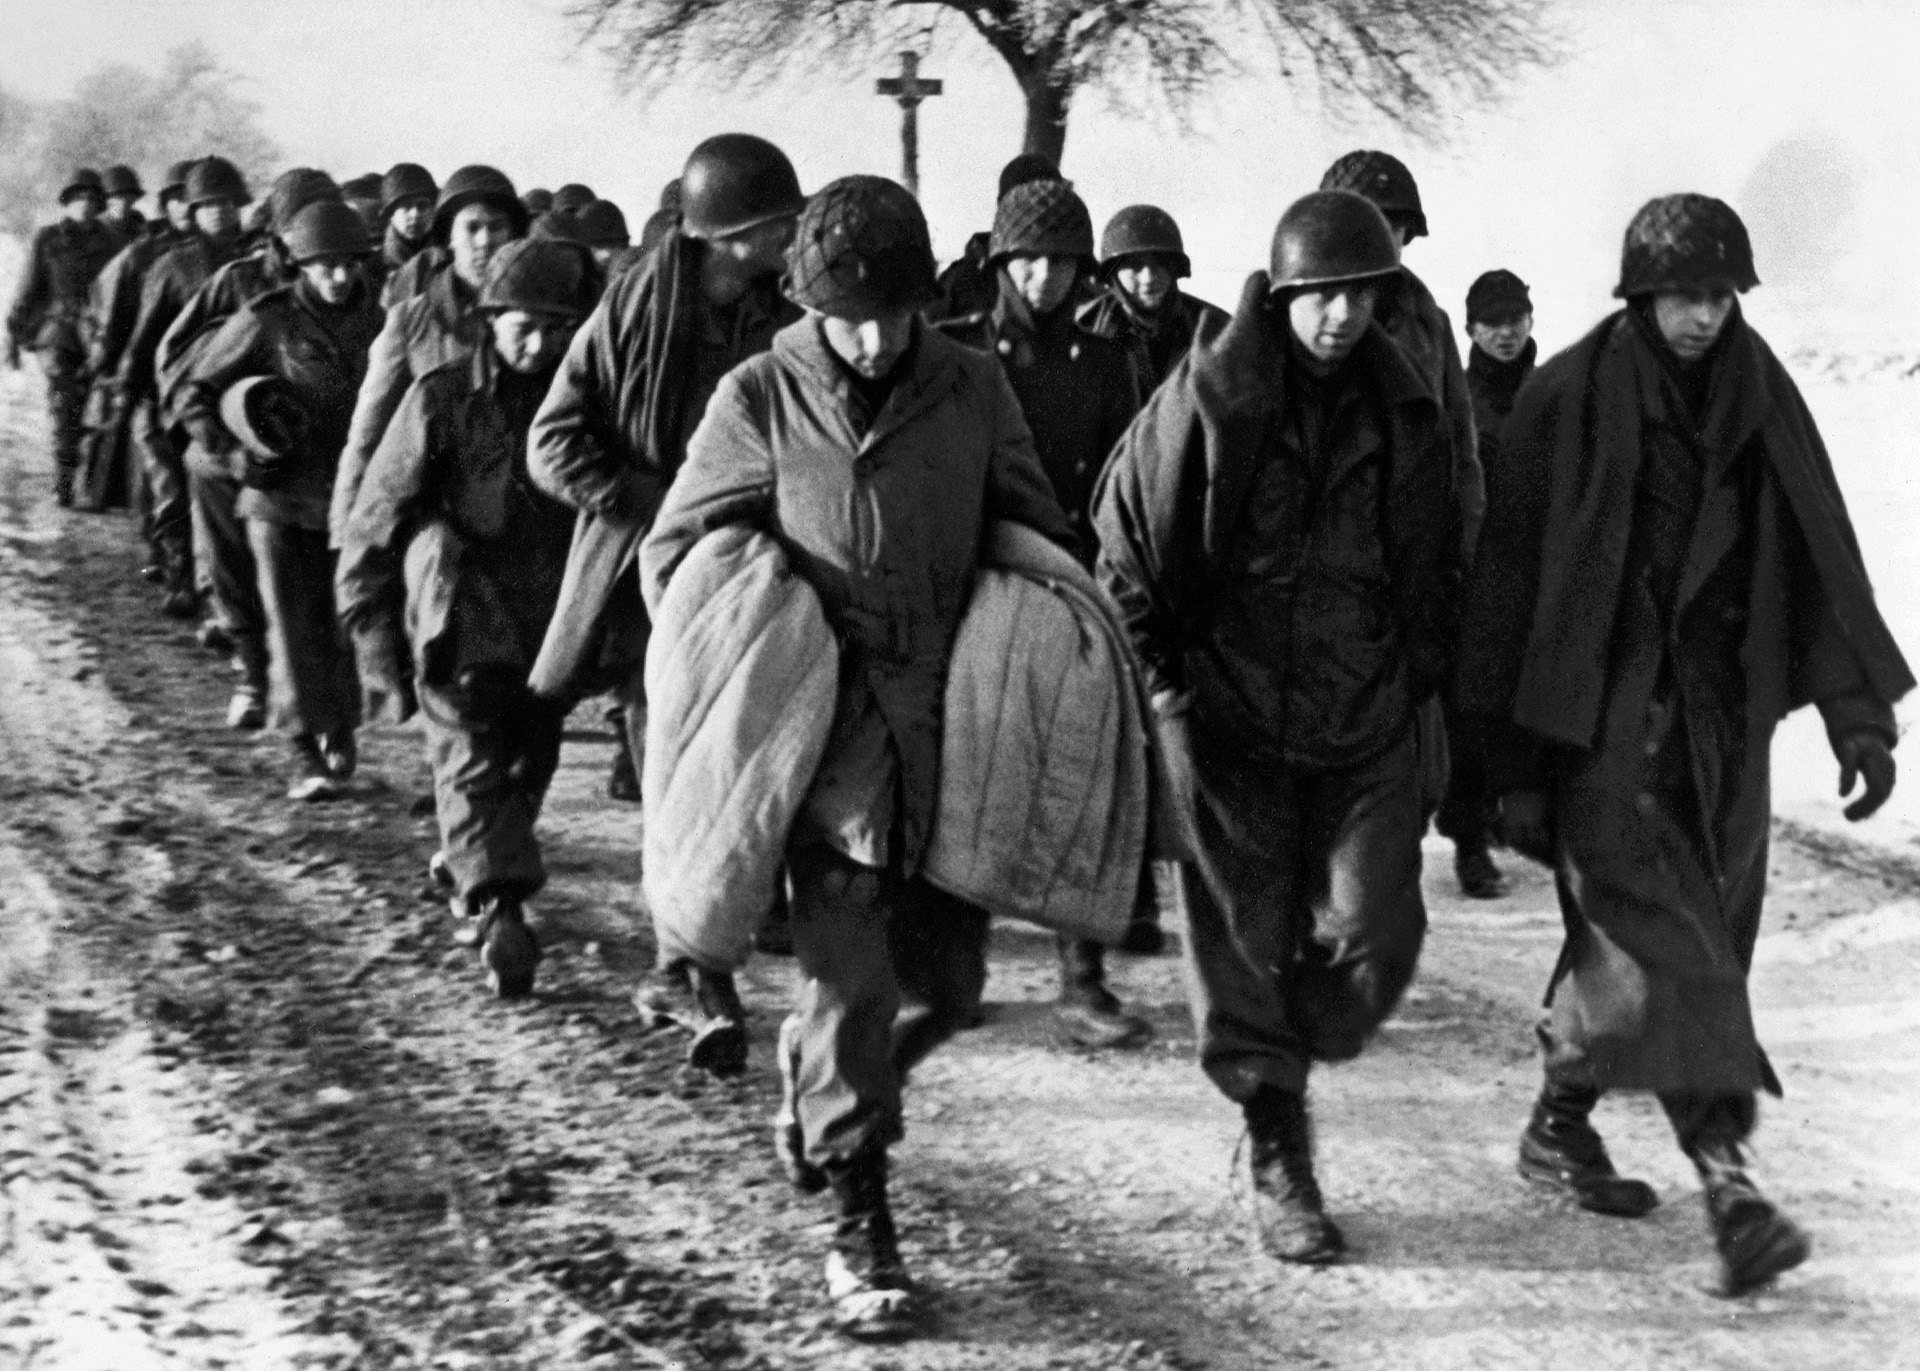 Cold and dispirited, American soldiers, captured during the Battle of the Bulge, are marched to a POW camp behind German lines. Myers was one of hundreds of Americans taken prisoner and held until the end of the war.